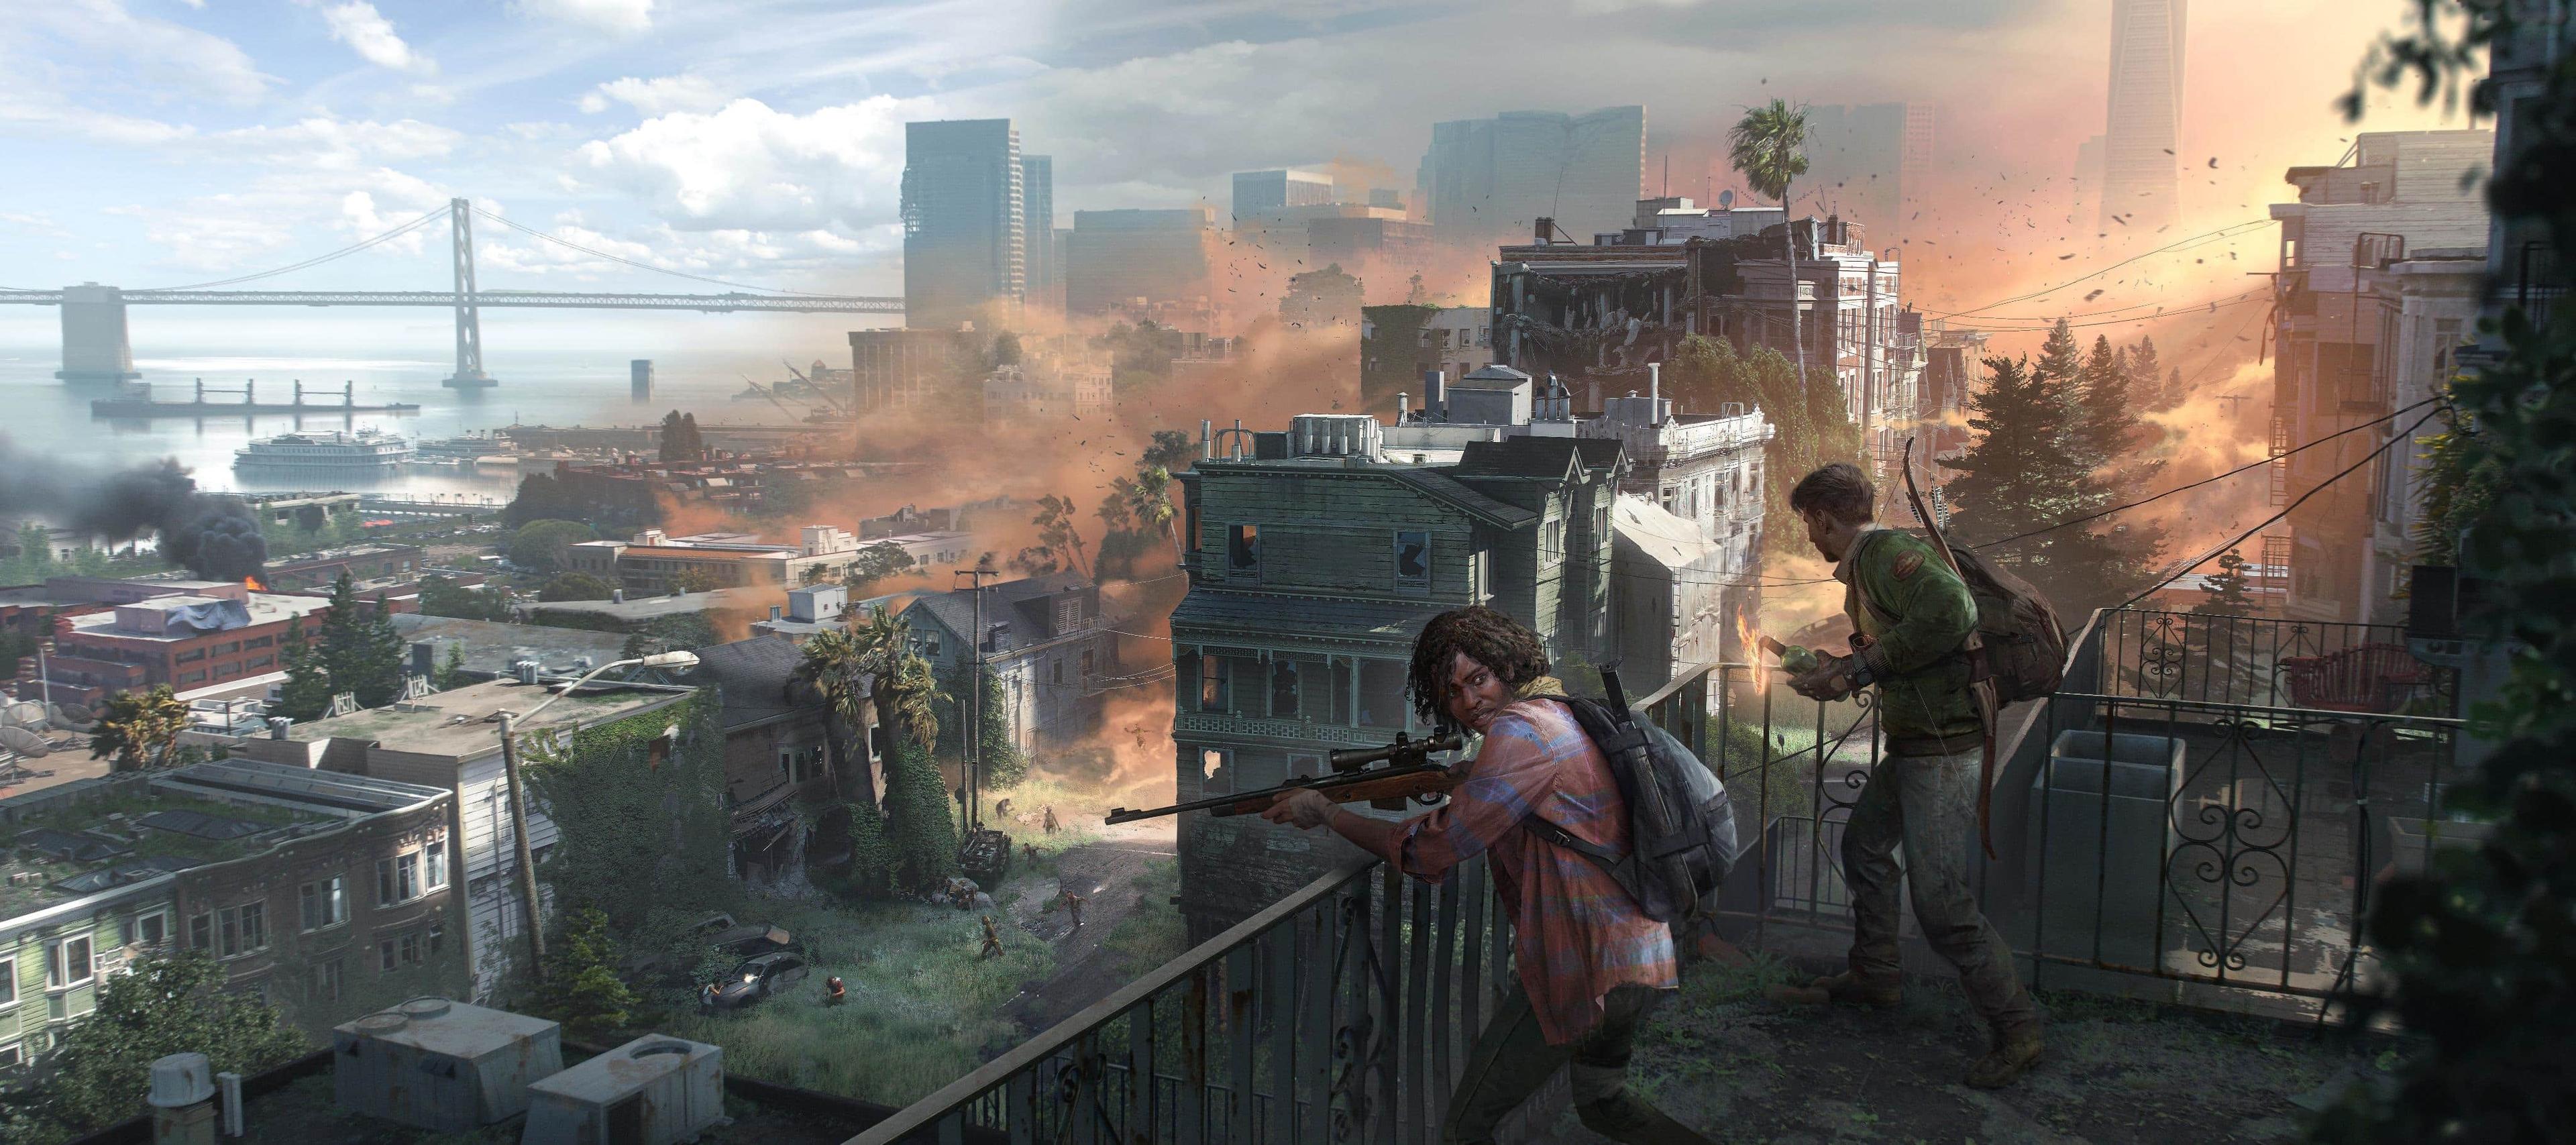 Heartbreak, Pain and ZOMBIES  The Last of Us Episode 5 Review